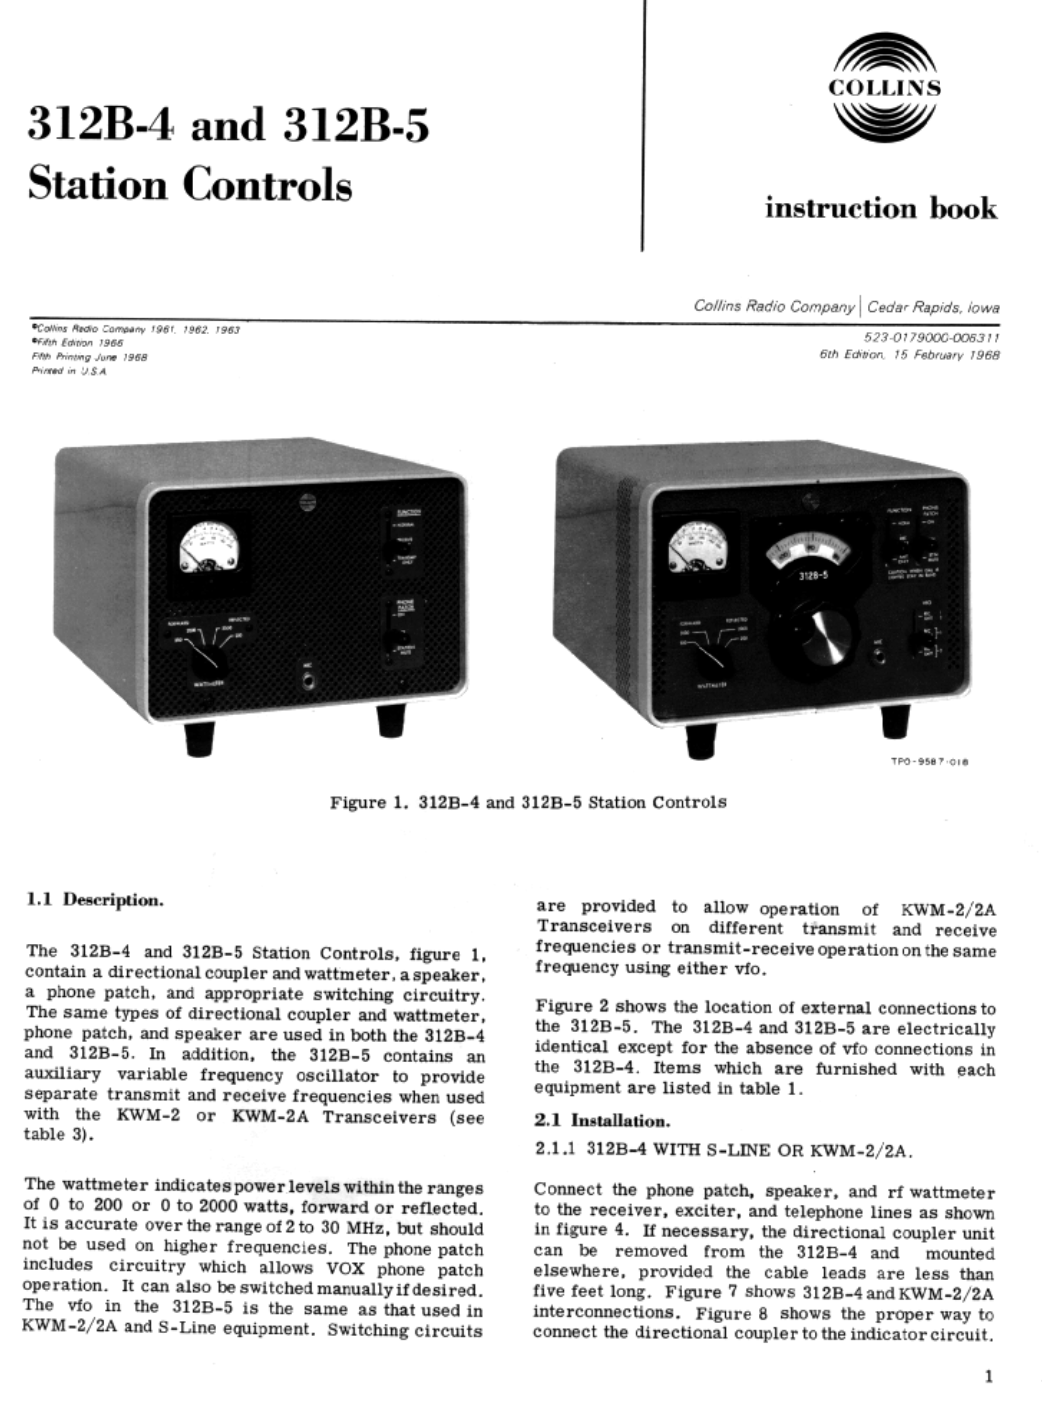 Collins 312B-4 Station Controller - Instruction Manual